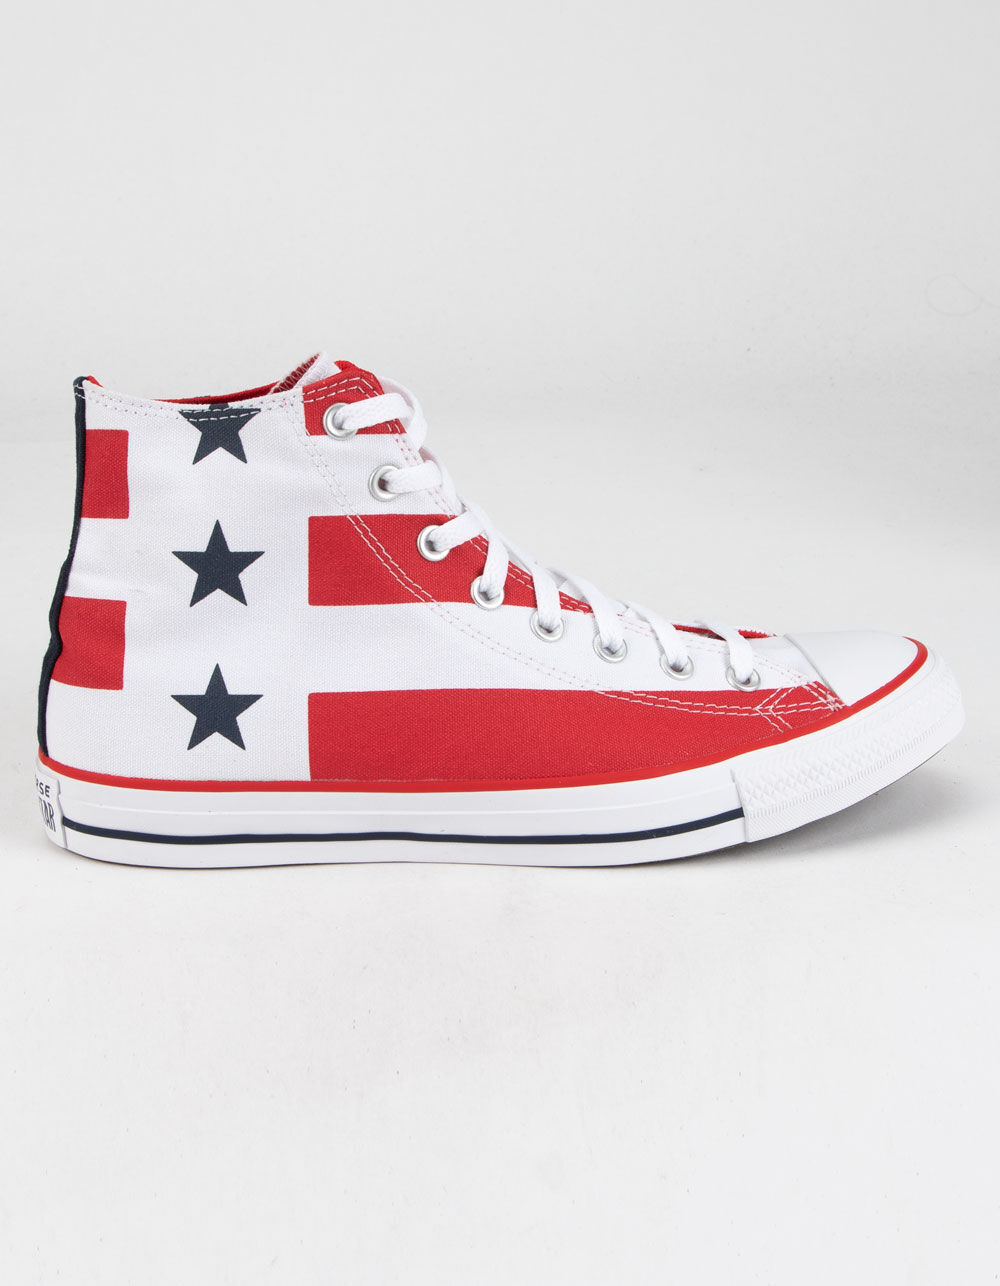 CONVERSE Stars & Stripes Taylor All Star Top Shoes - RED/WHITE/NAVY